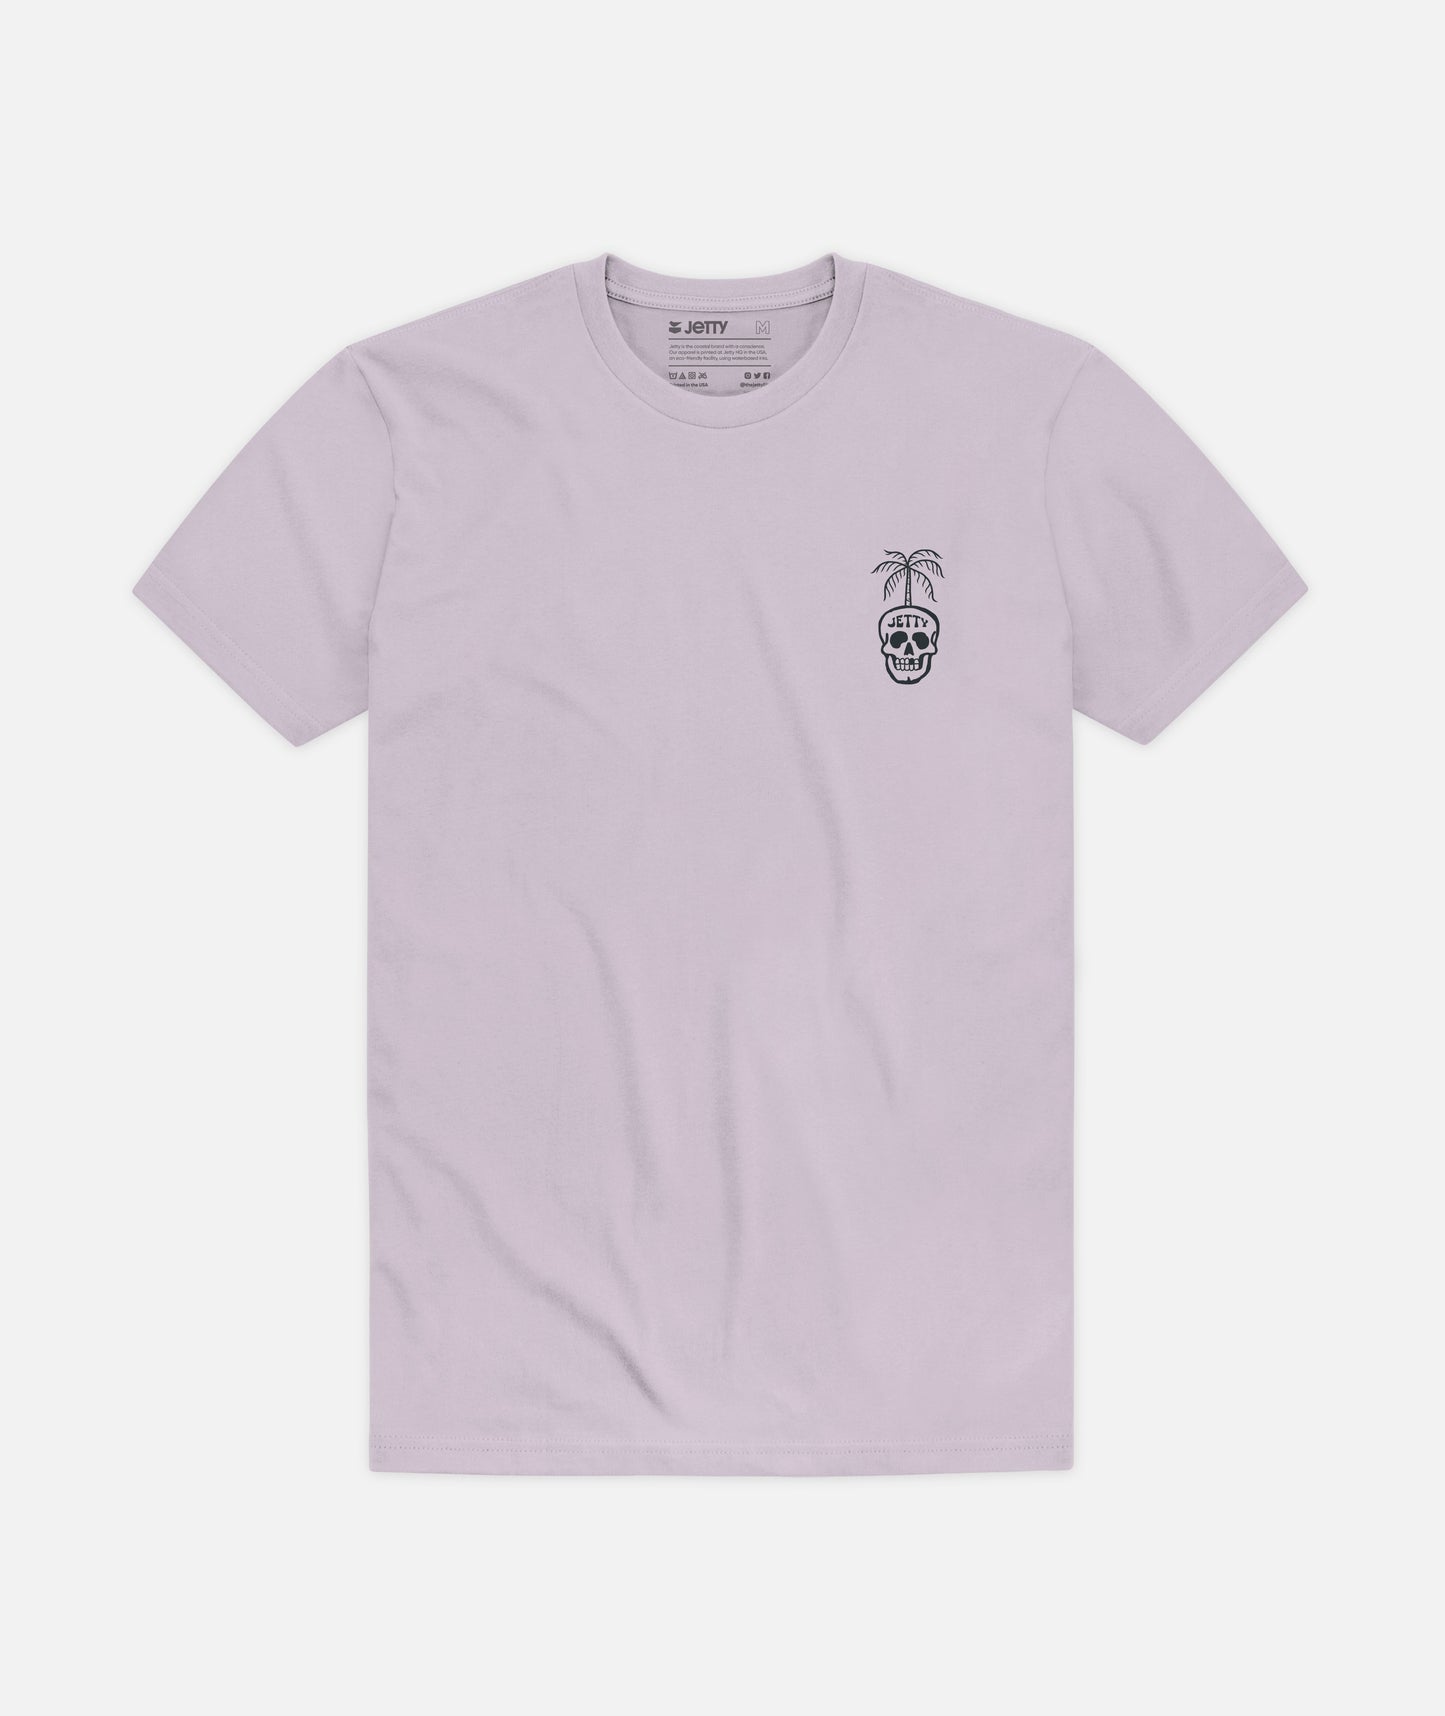 Sprout Tee - Lavender